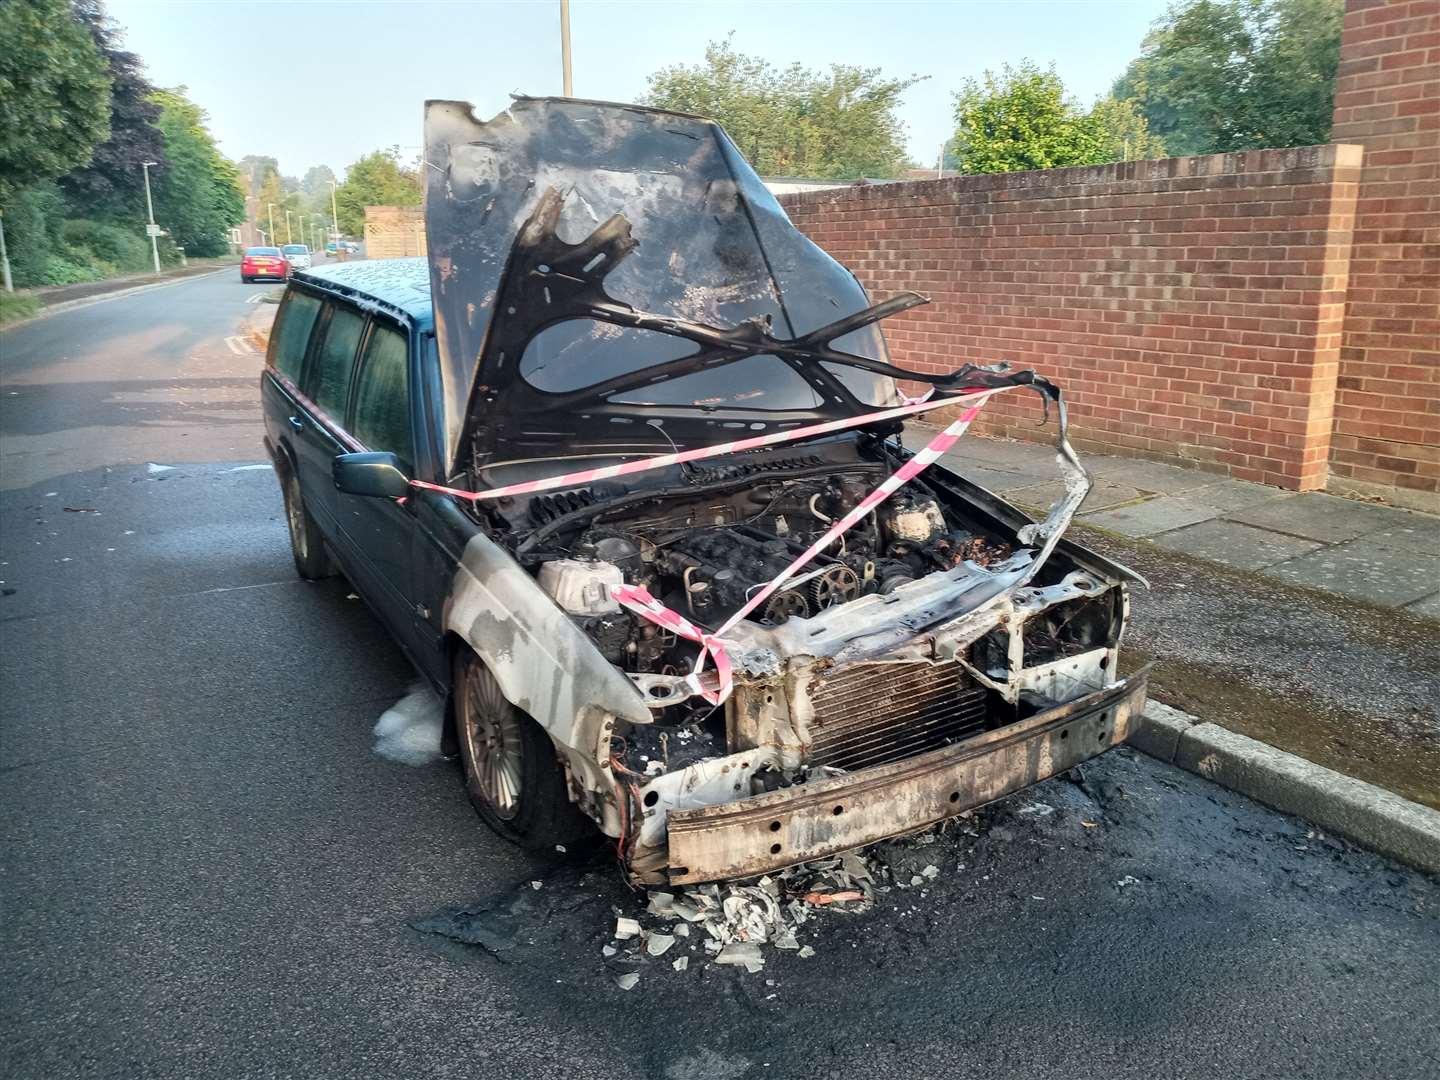 Another car set alight in Bishops Way, Canterbury